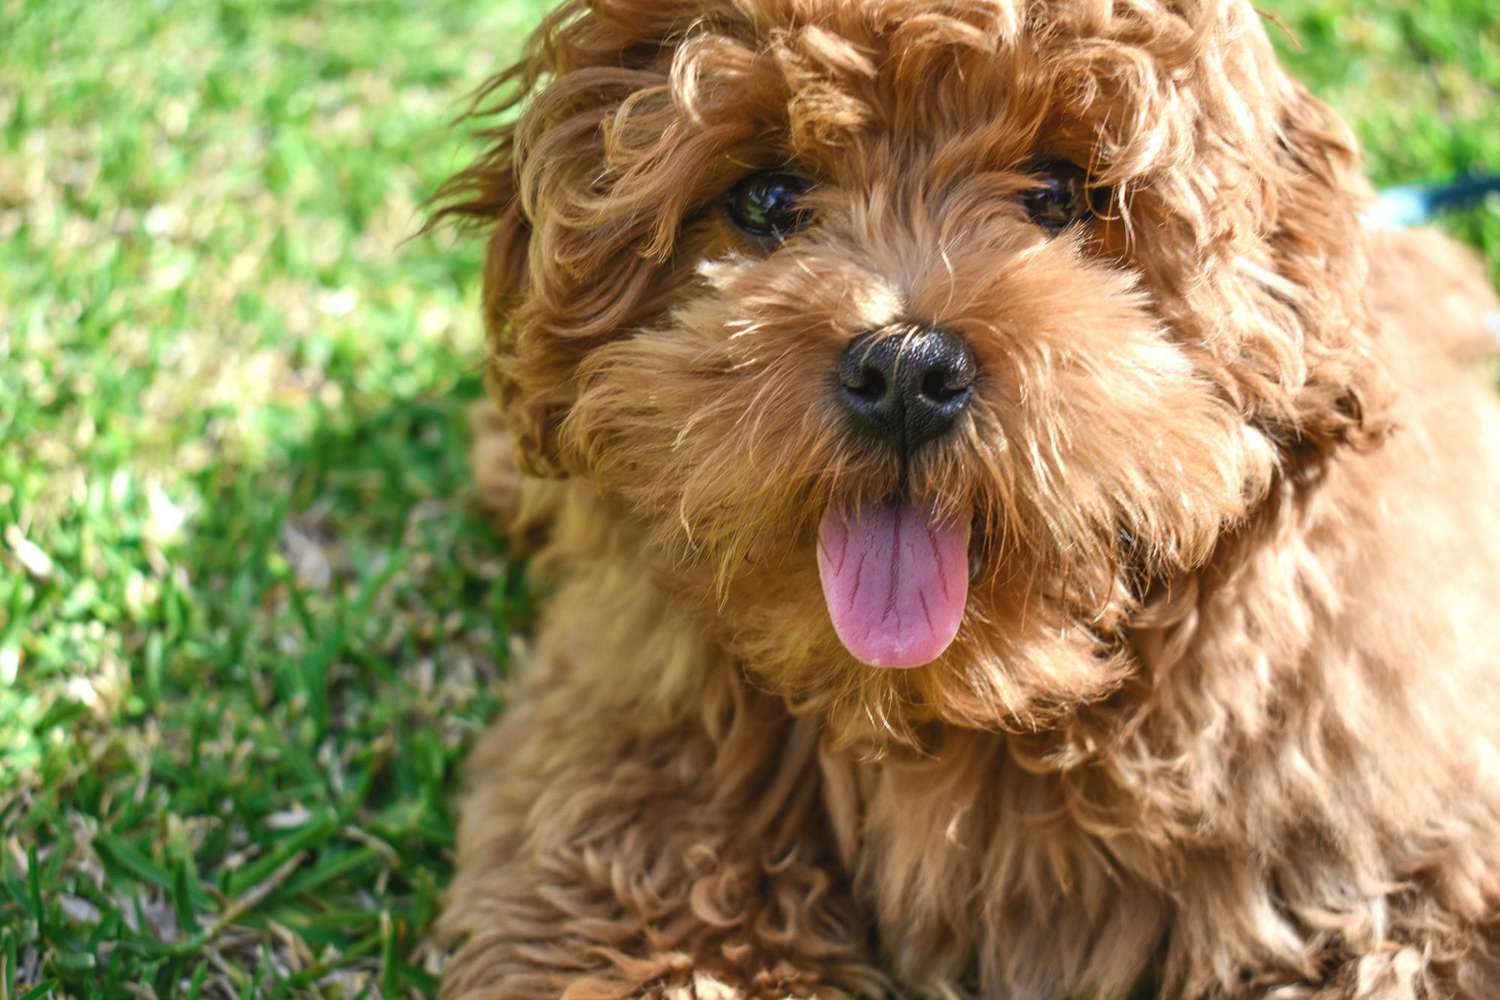 Caramel labradoodle sticks tongue out while laying in grass